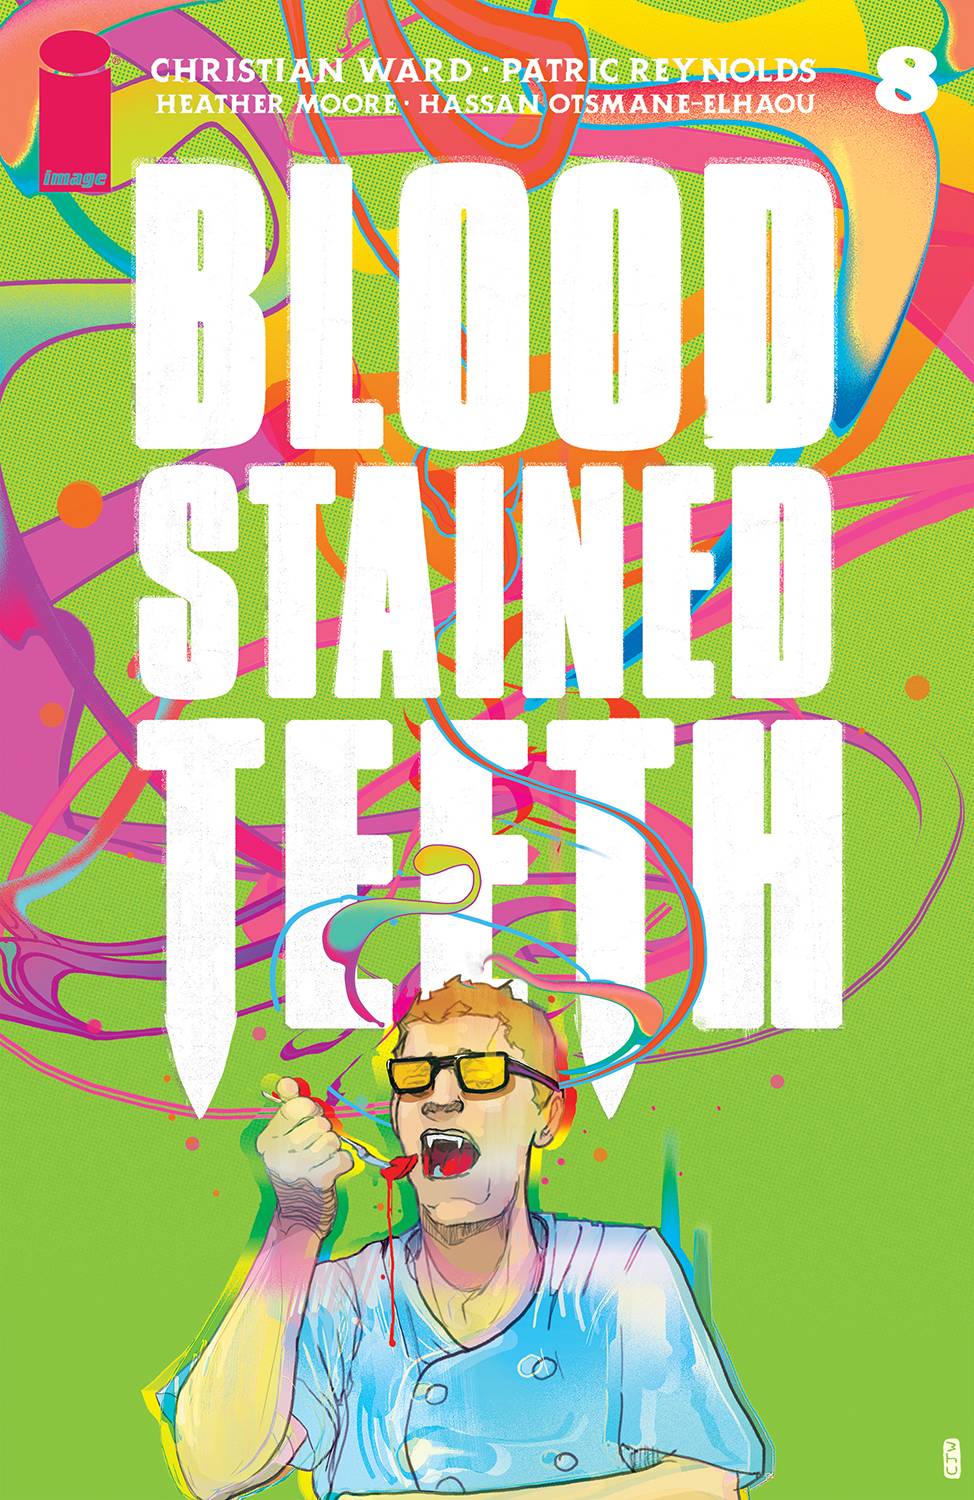 BLOOD STAINED TEETH